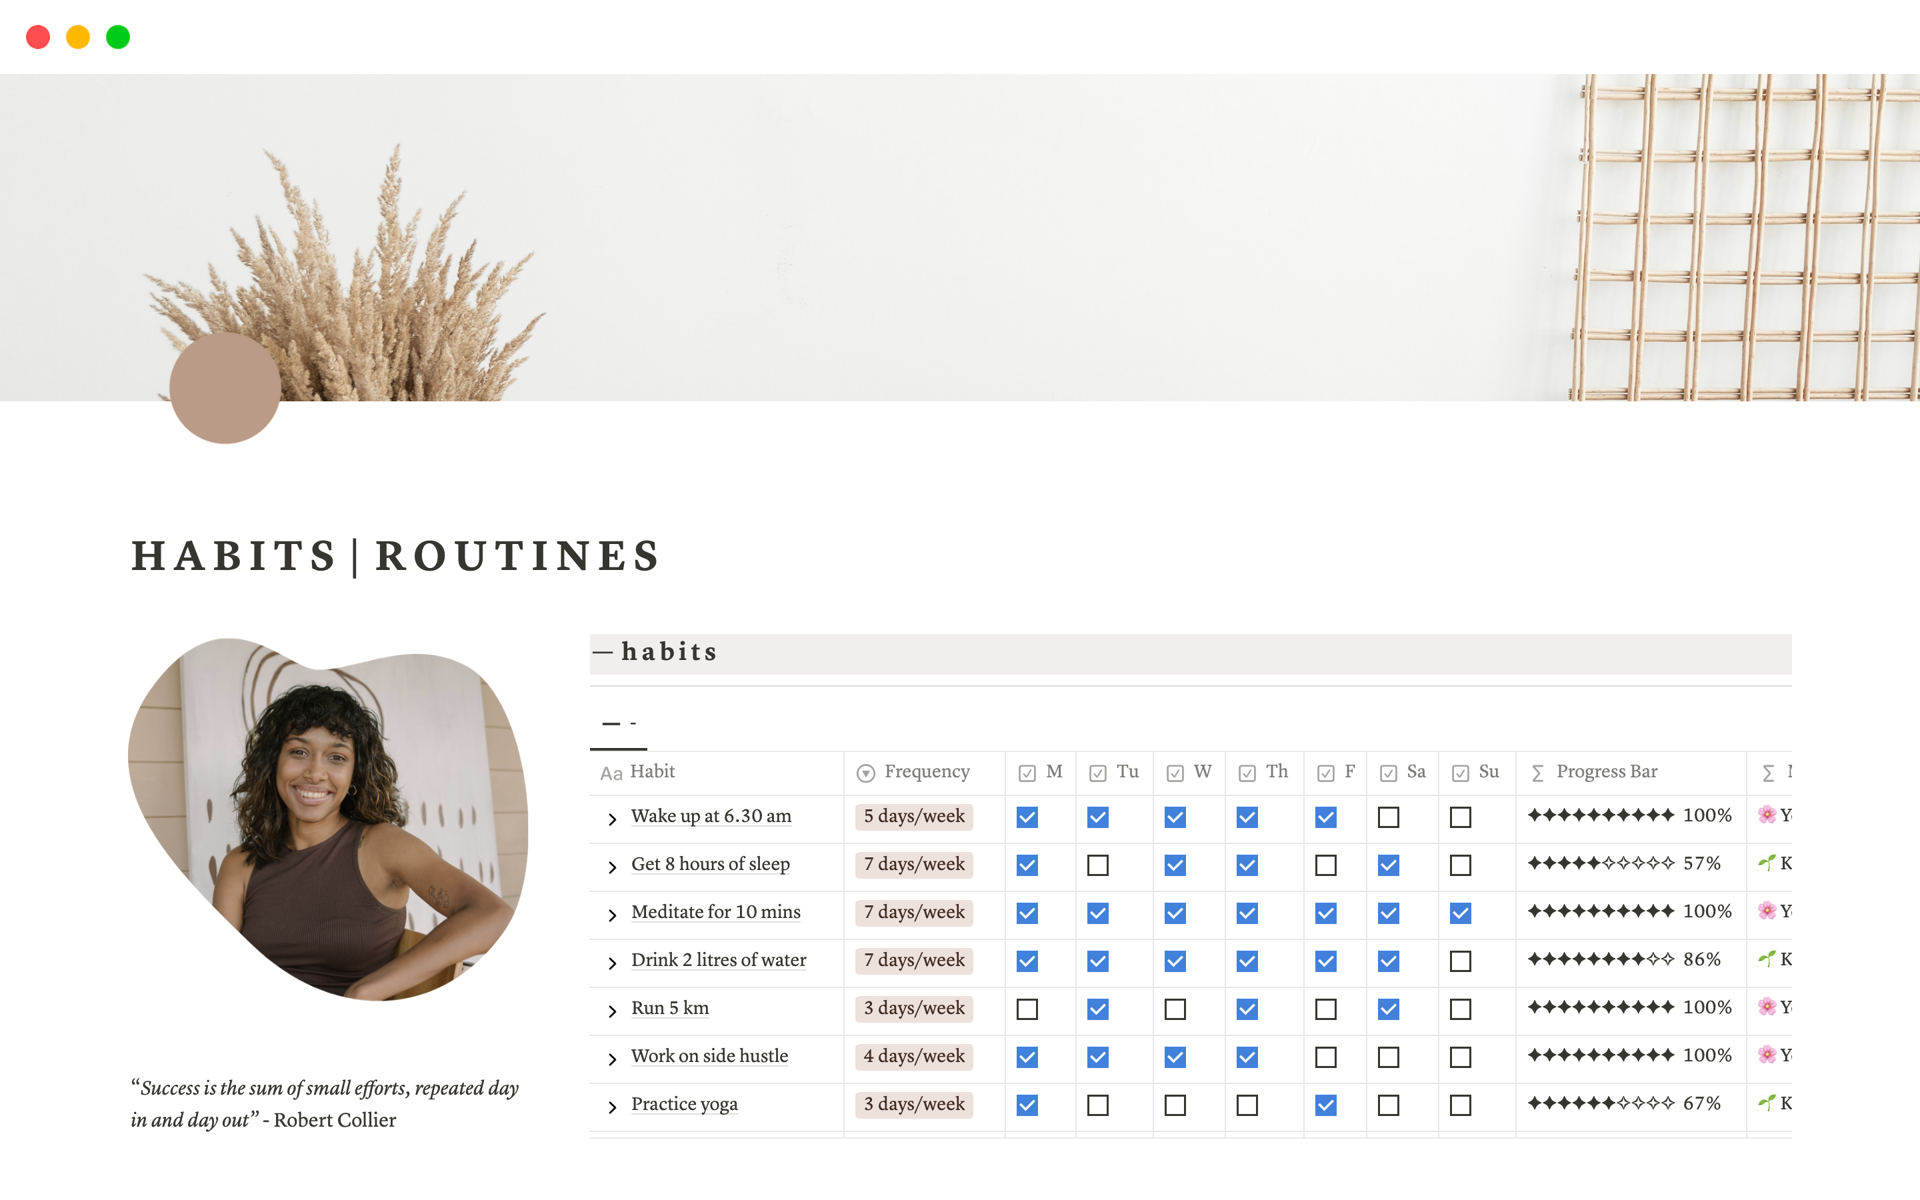 A habit tracker and routines template where you can easily set up daily habits and routines, track your progress and stay motivated to reach your goals.